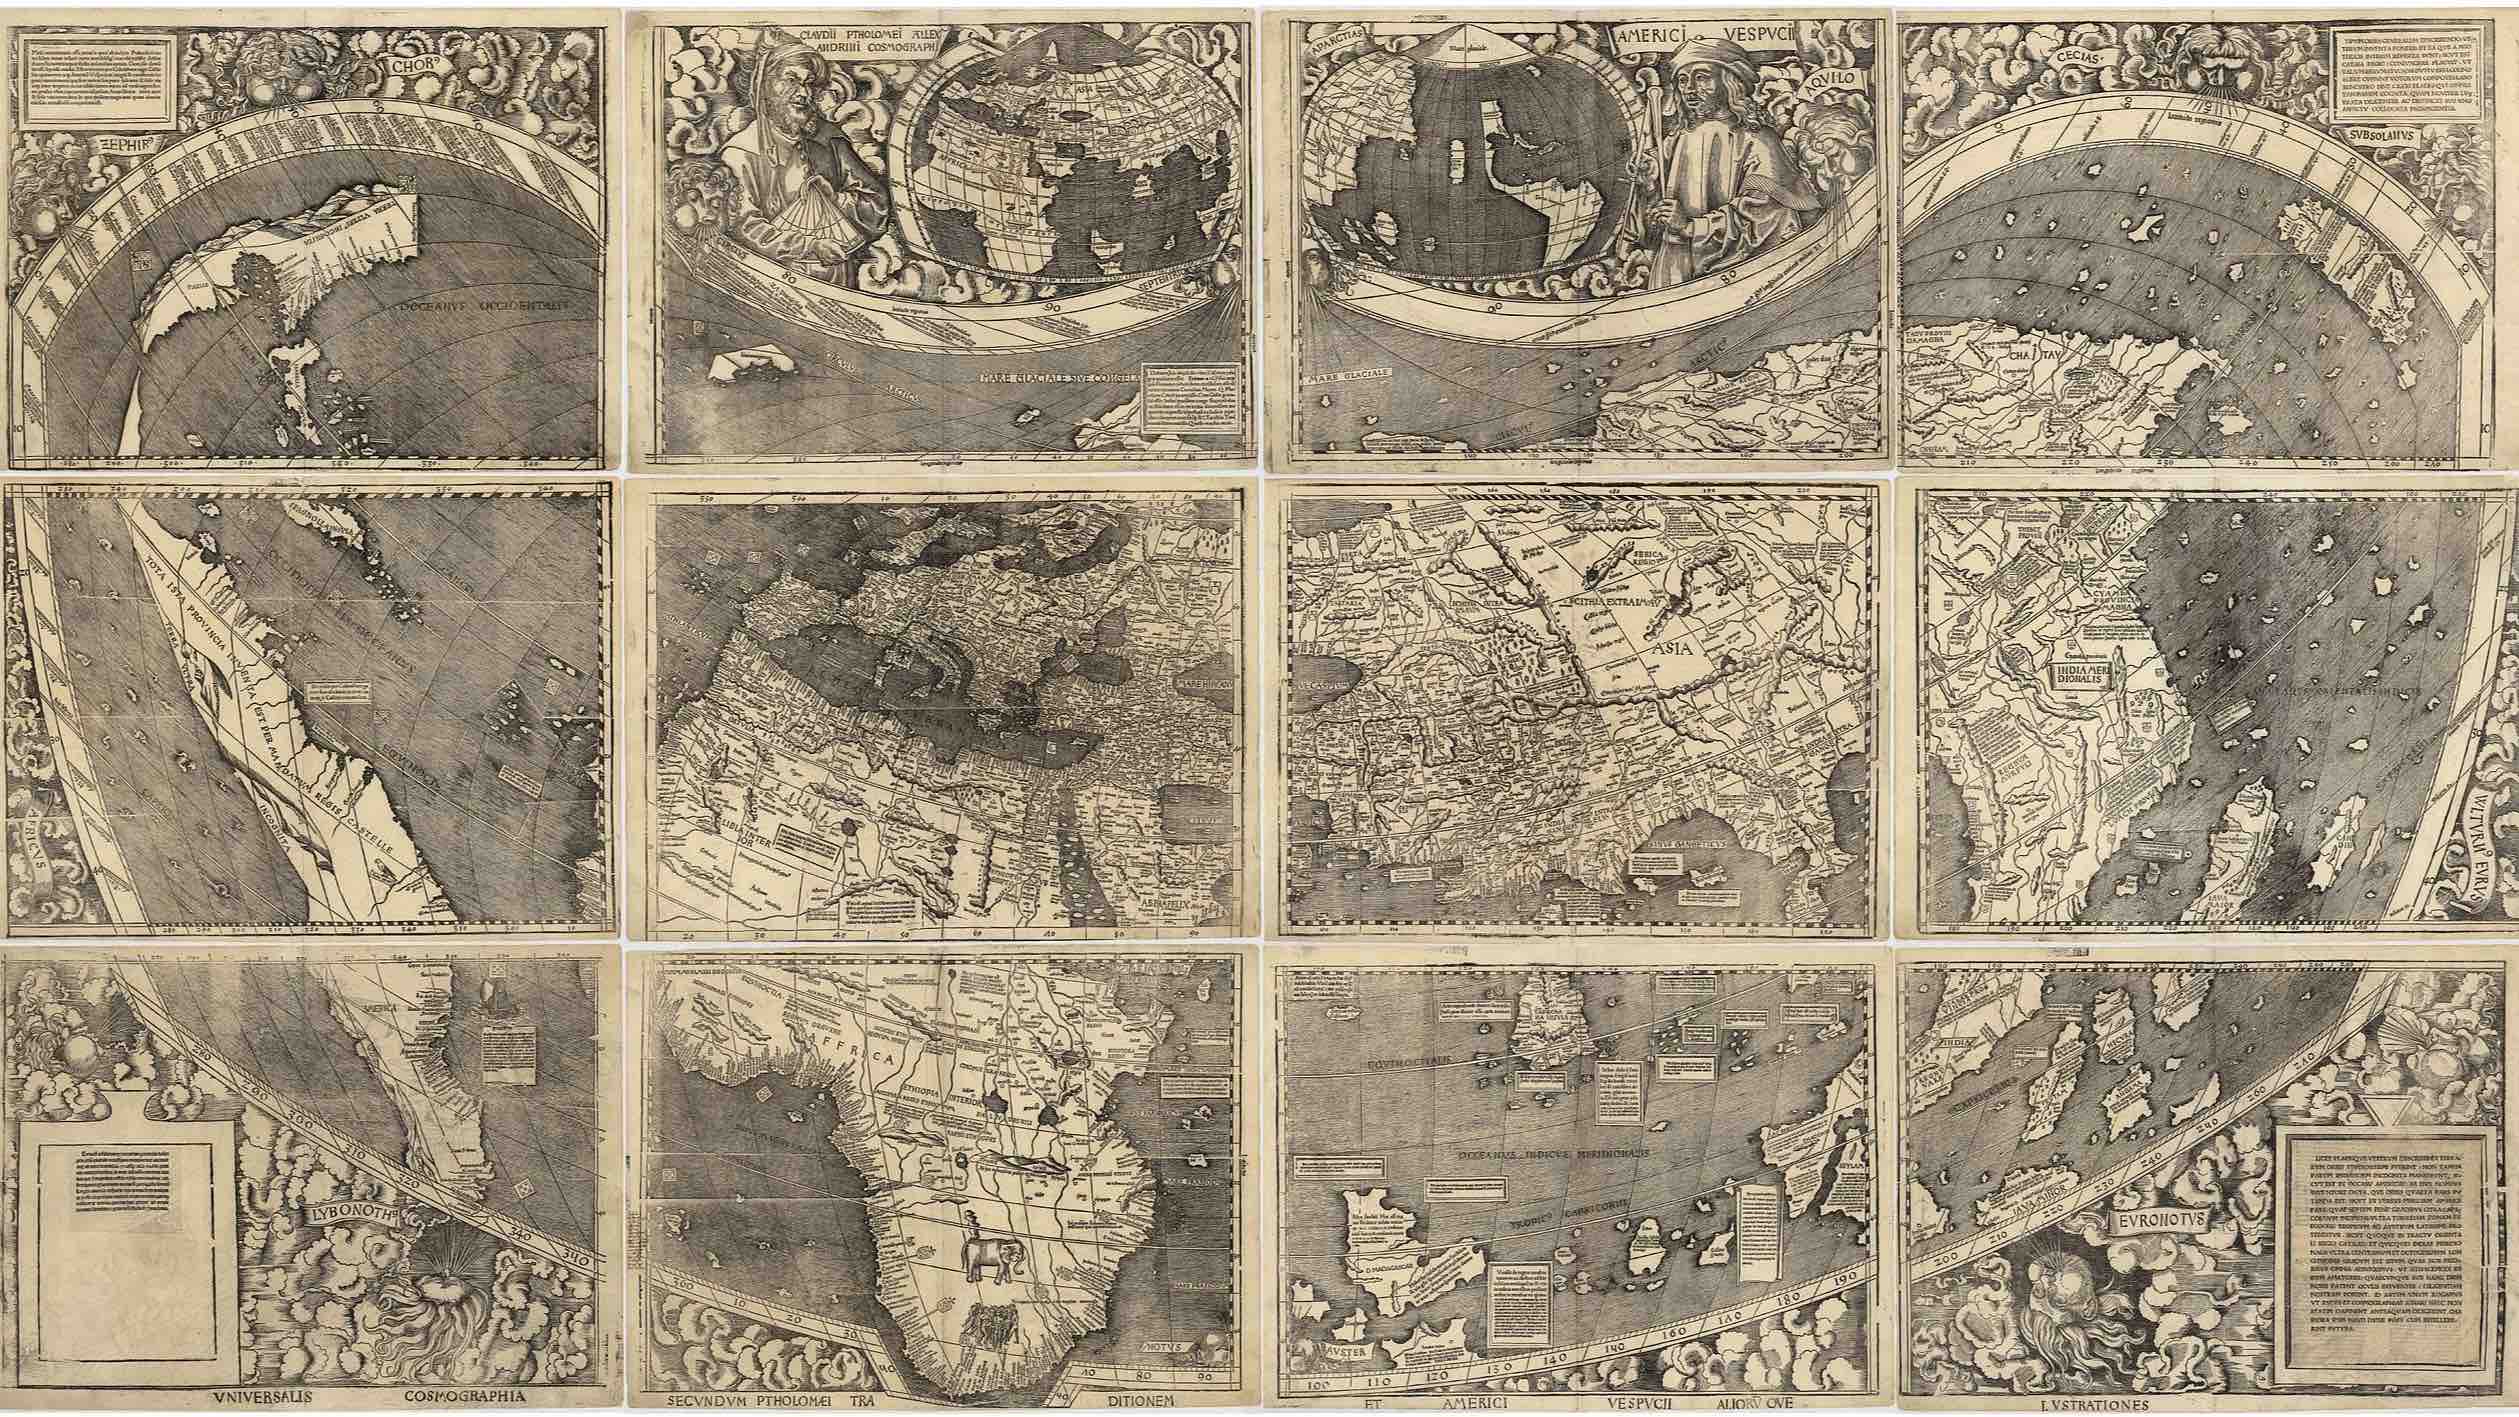 Commonly known as the "Waldseemüller map," the document is the first known map to use the name "America." It was published in 1507 by German cartographer Martin Waldseemüller.